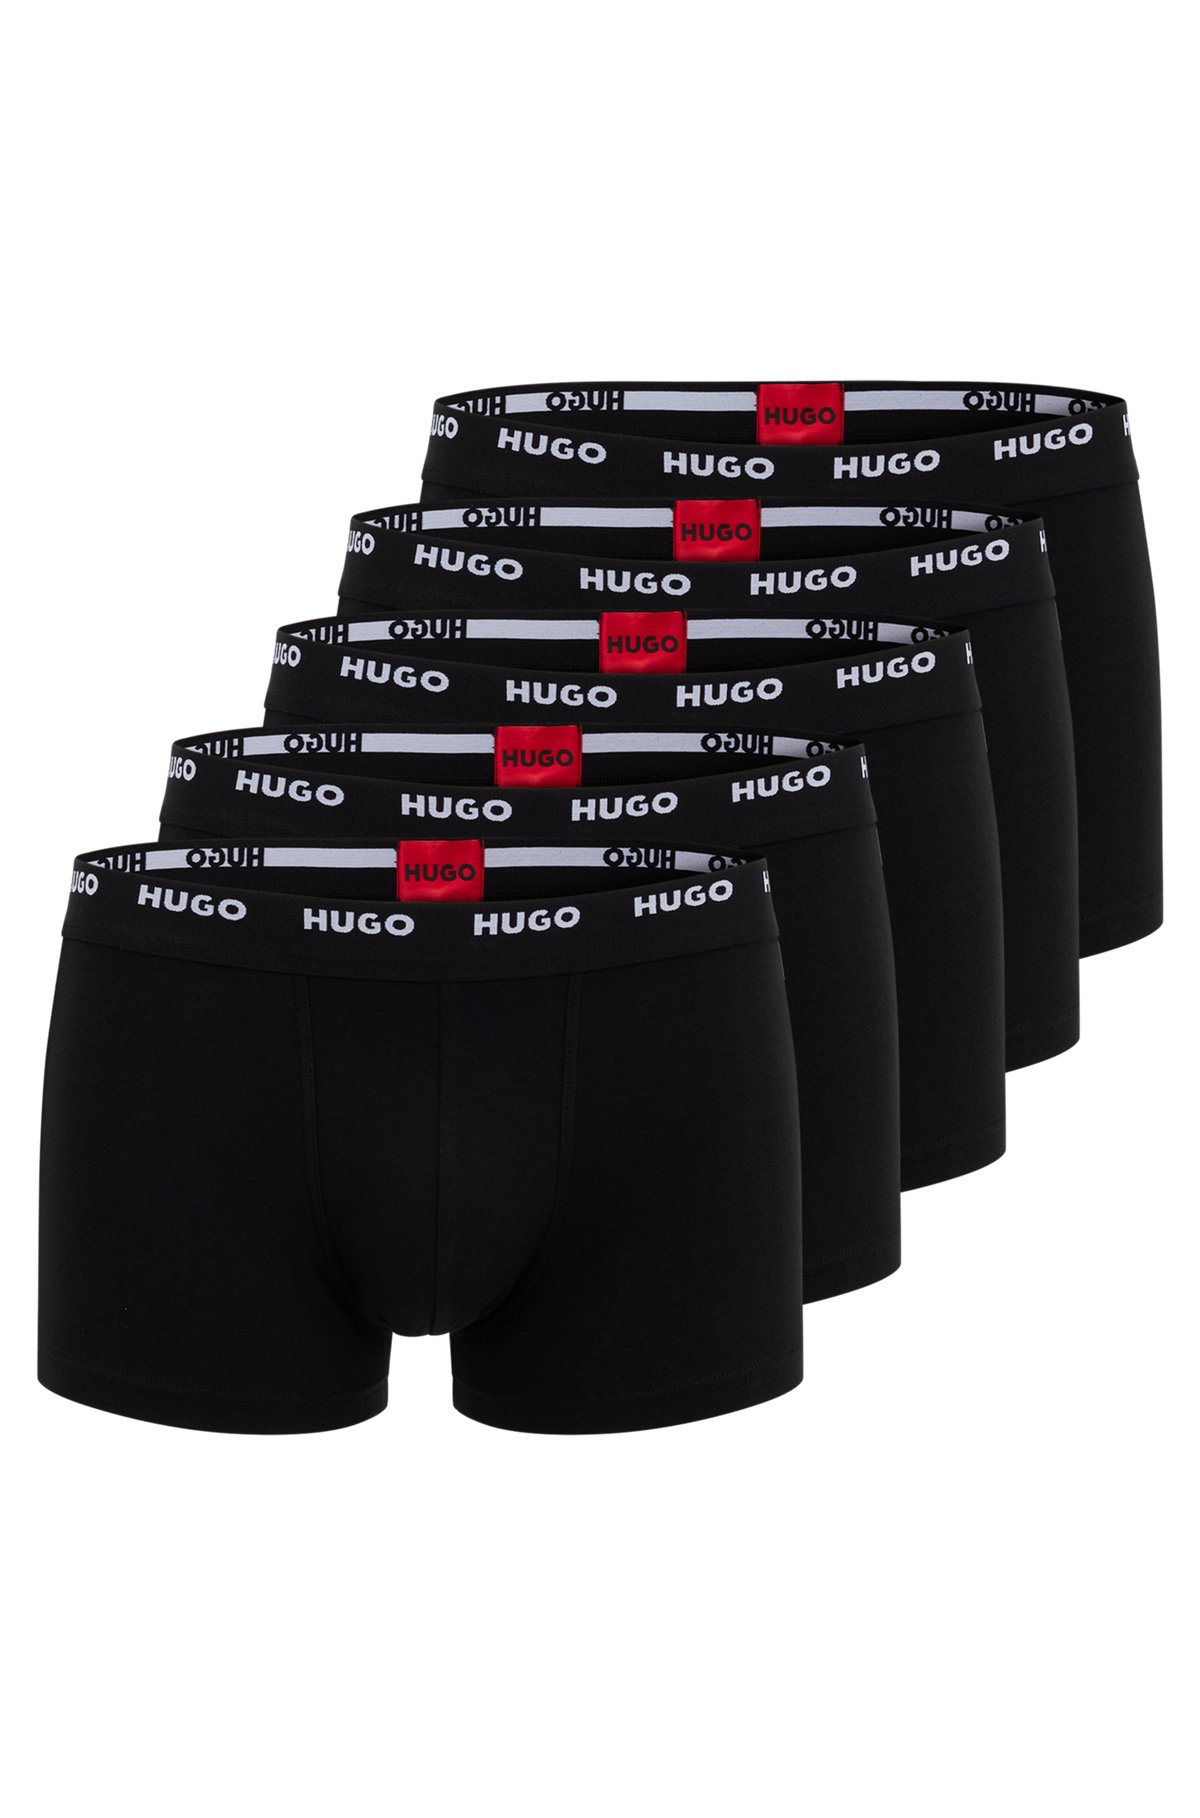 HUGO - Five-pack of with logo